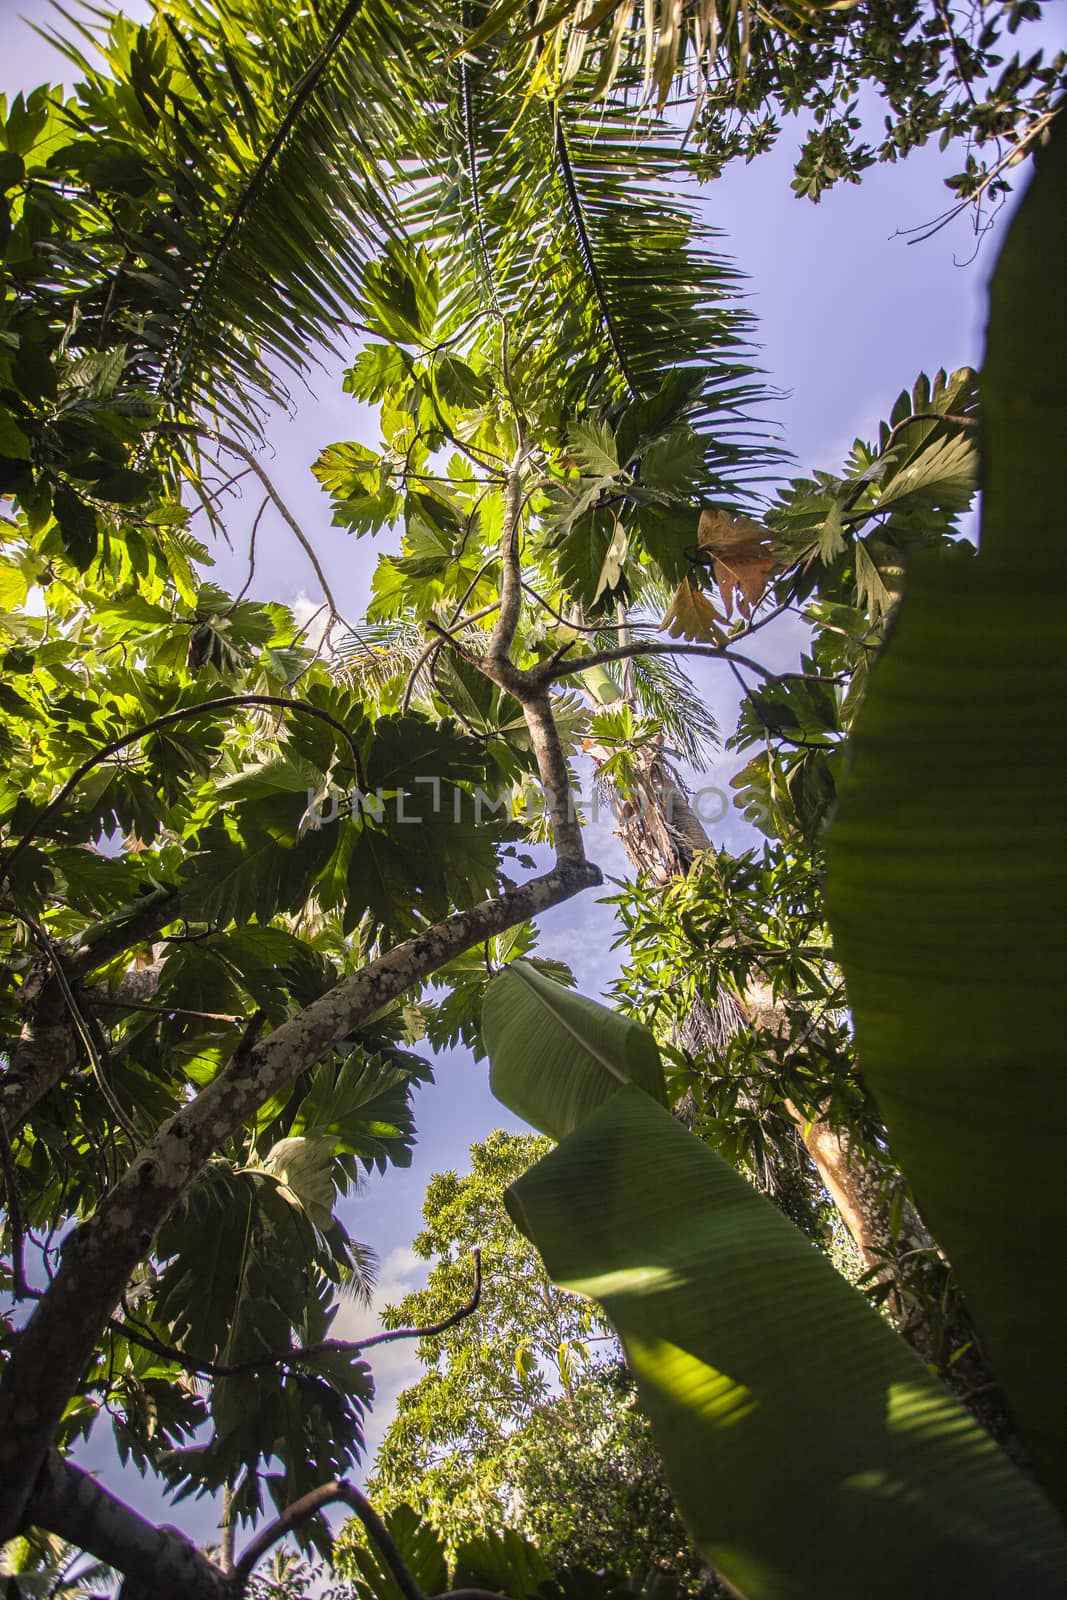 Tropical tree from Below 2 by pippocarlot